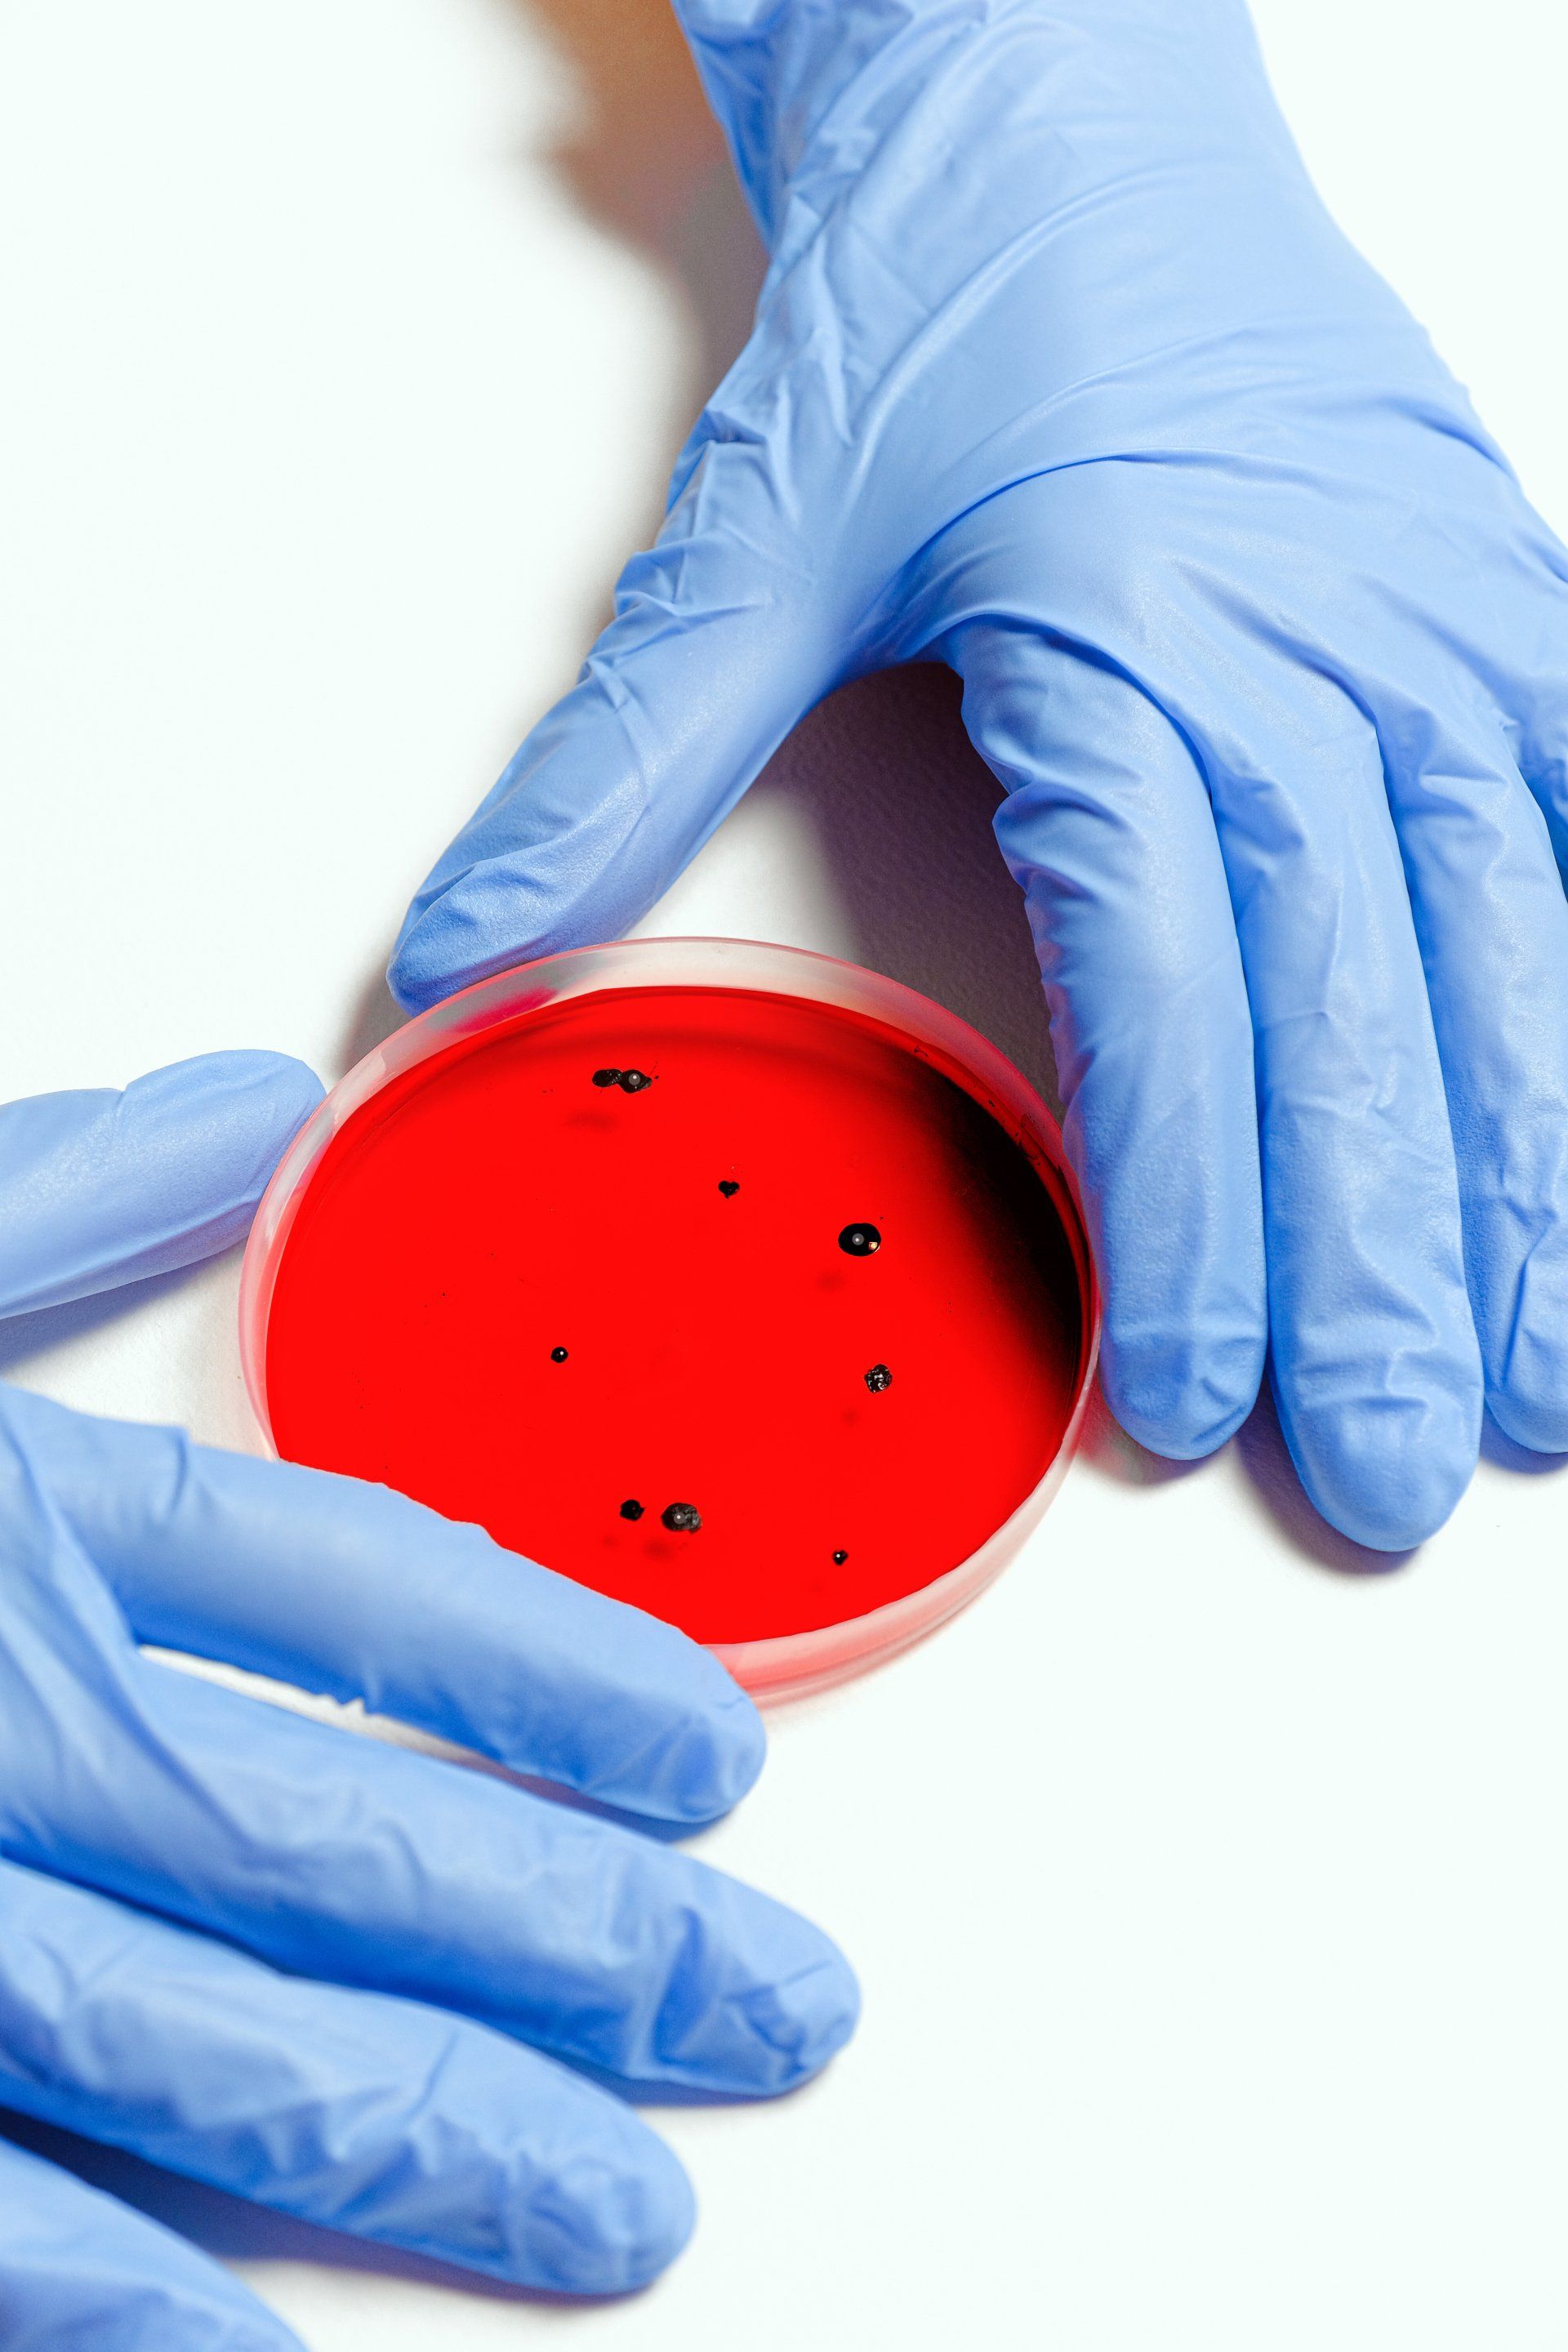 A person wearing blue gloves is holding a petri dish with red liquid in it